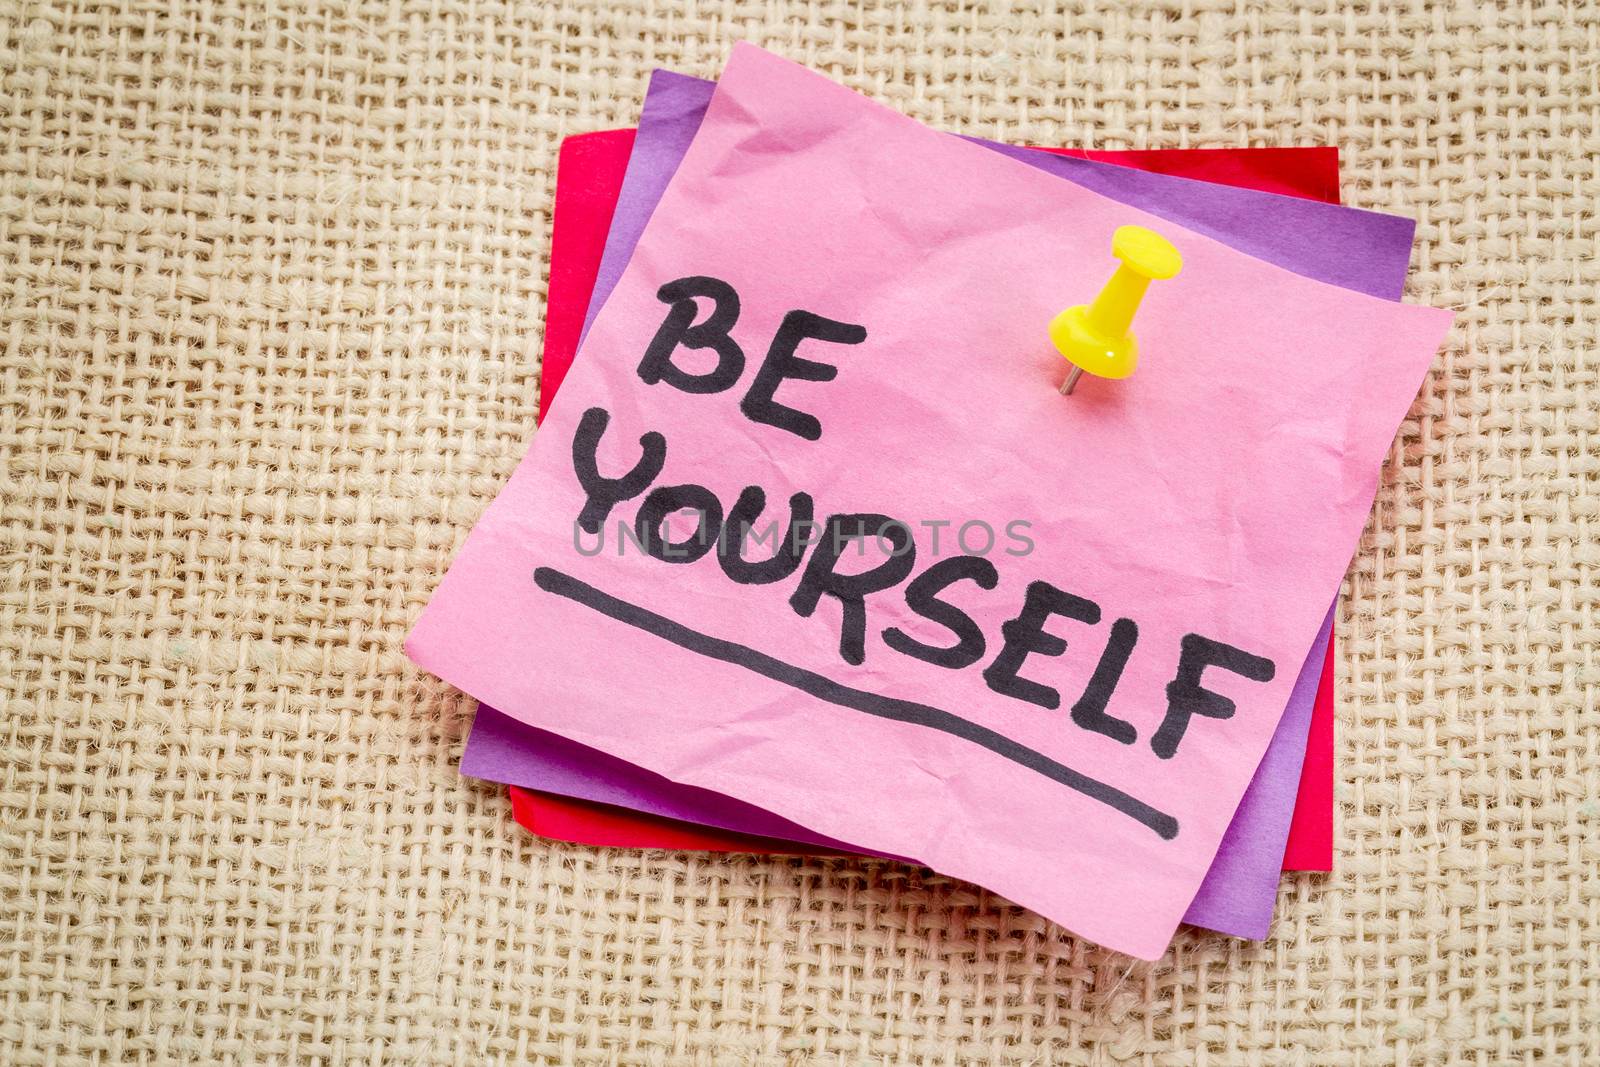 Be yourself reminder or advice on a sticky note against burlap canvas